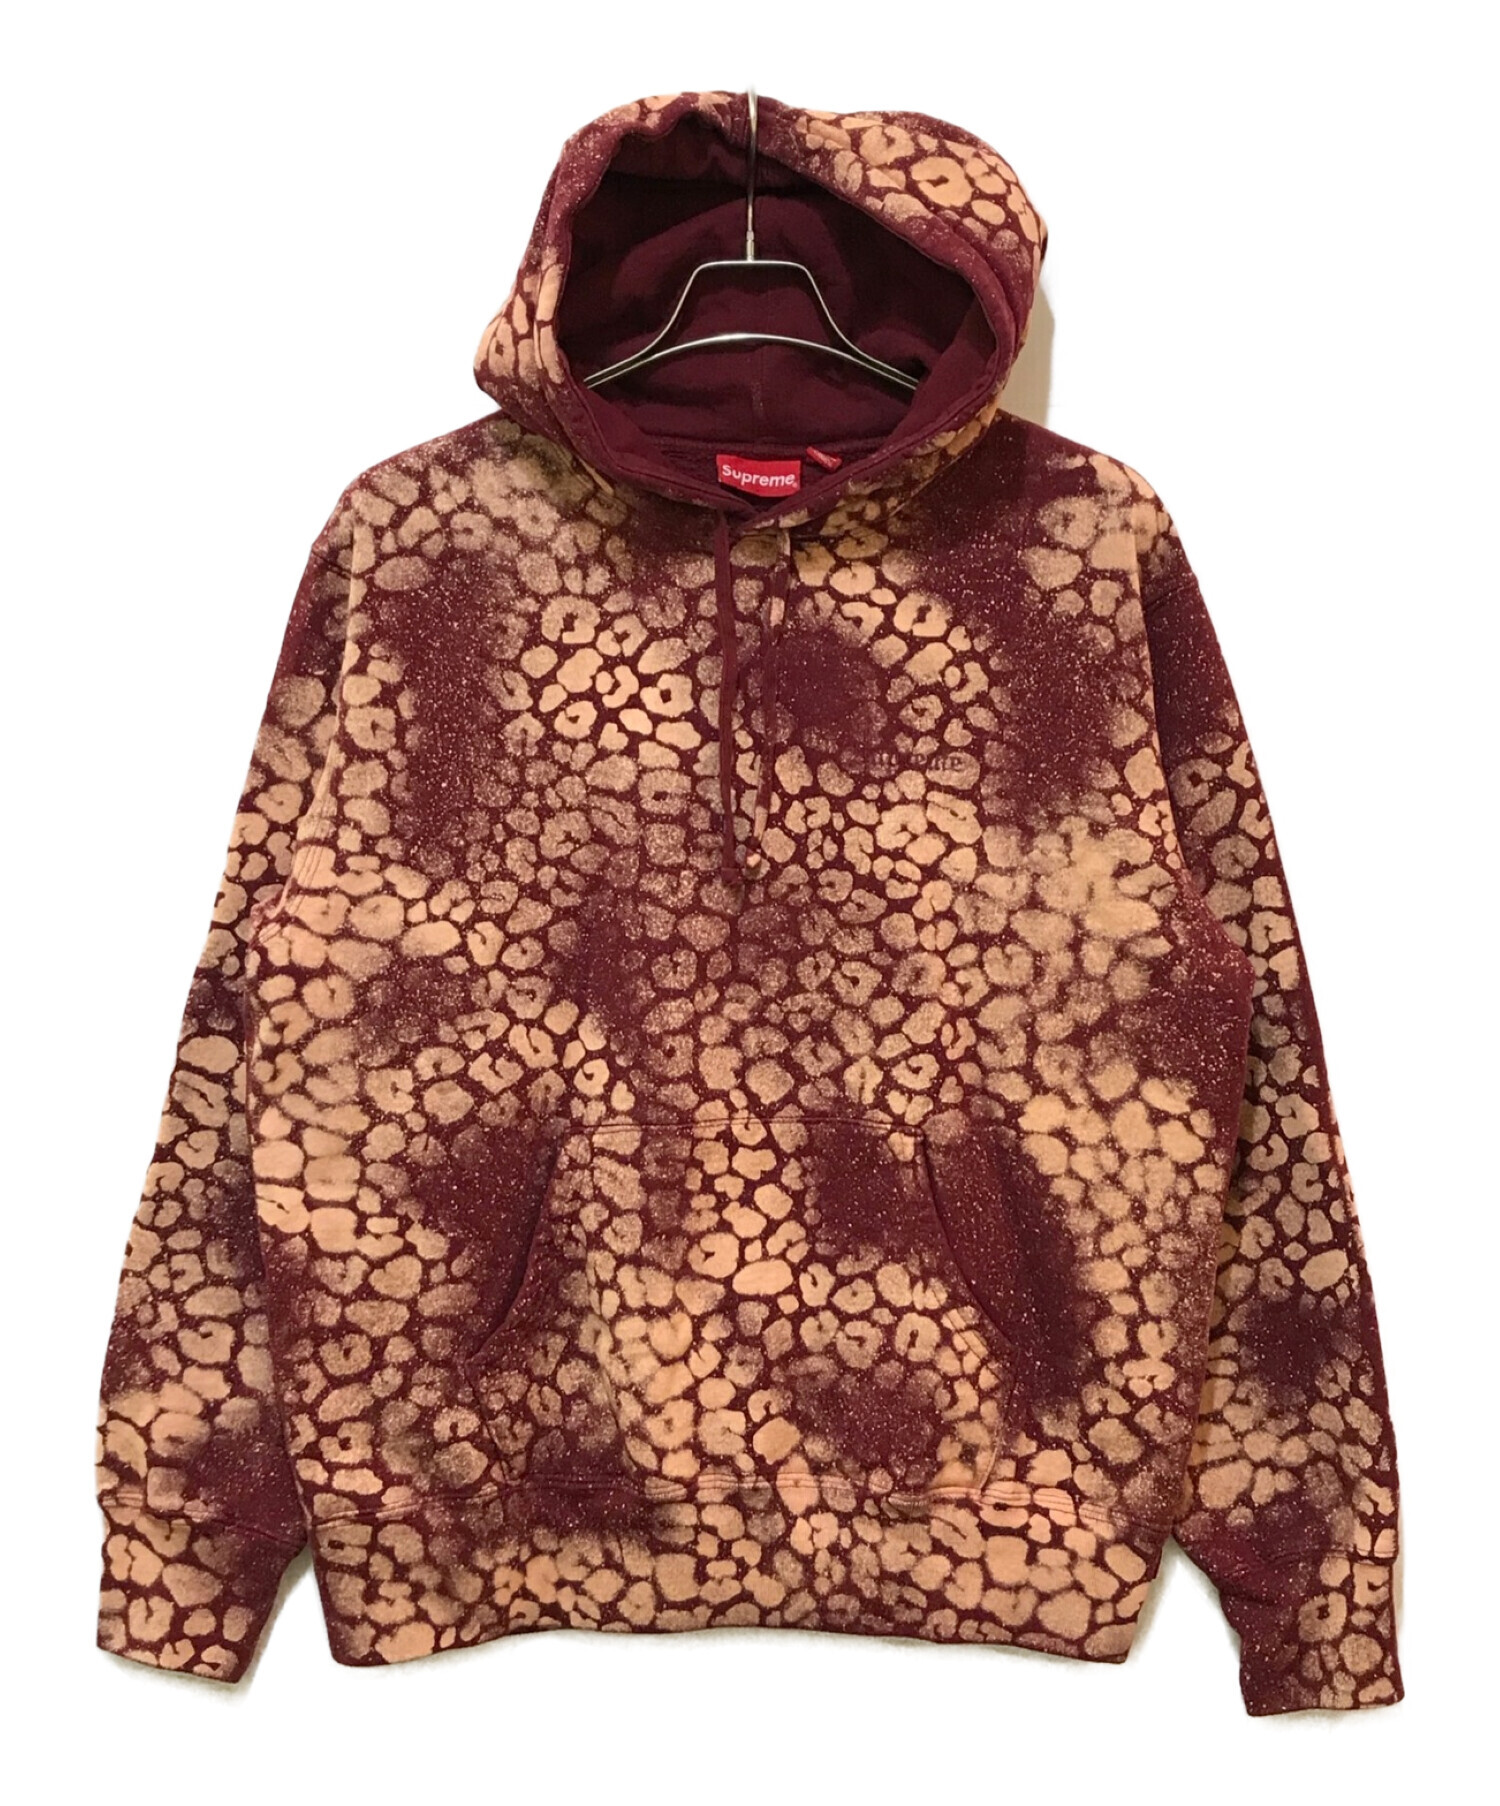 supreme Bleached Leopard Hooded m